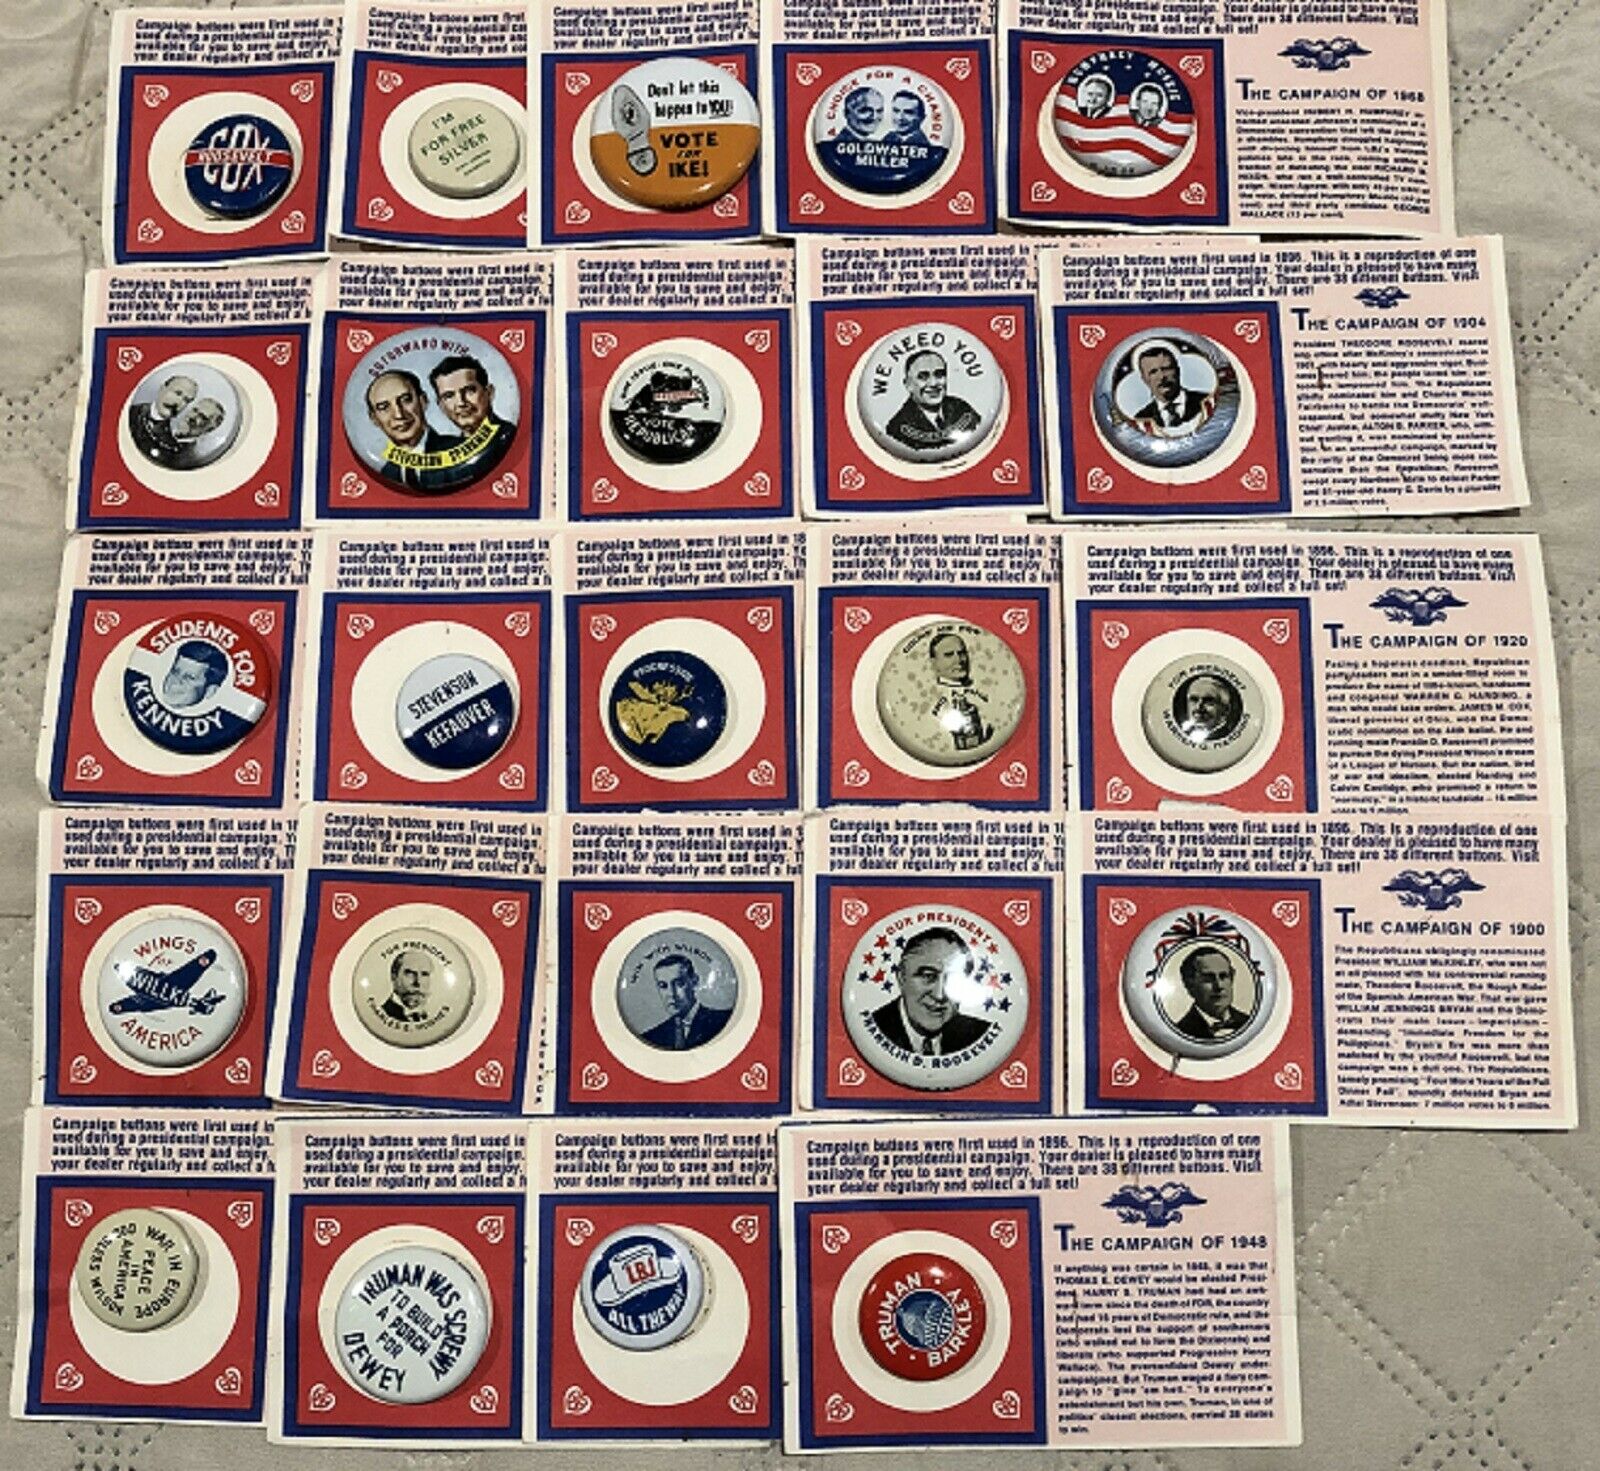 Lot 24 Different Vintage Amoco Oil Promo Reproduction Political Campaign Pins